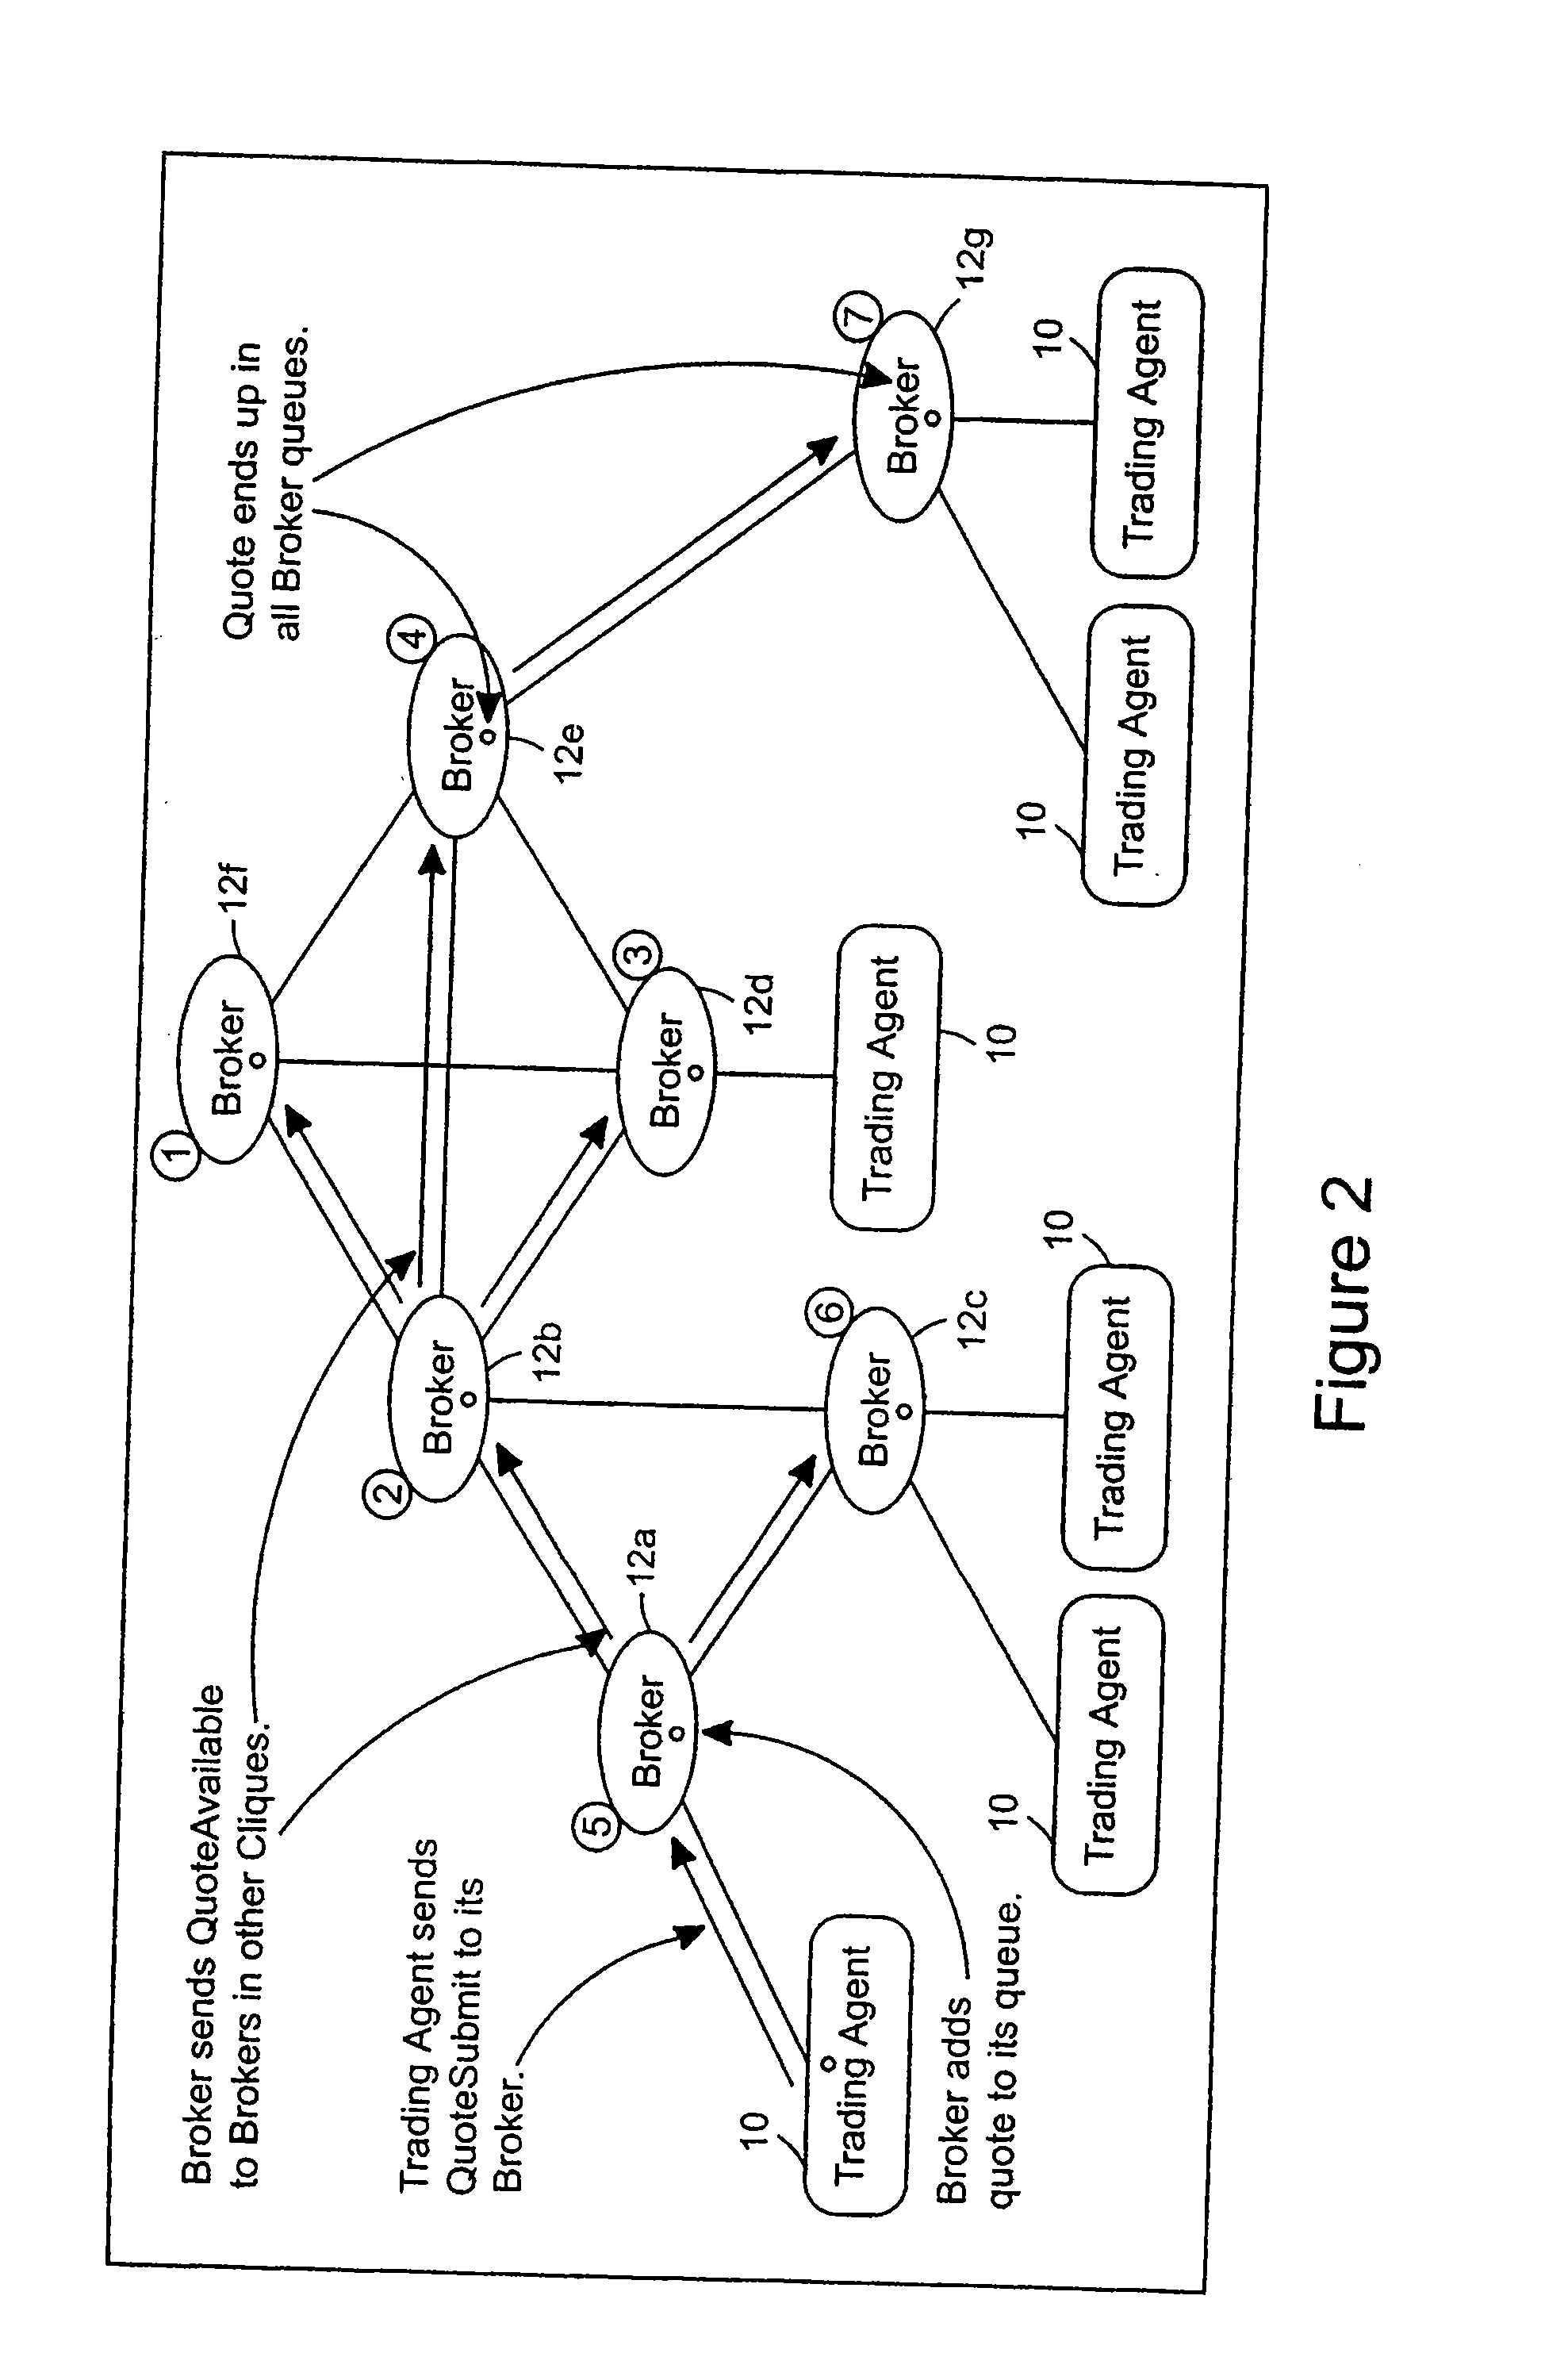 Compound order handling in an anonymous trading system